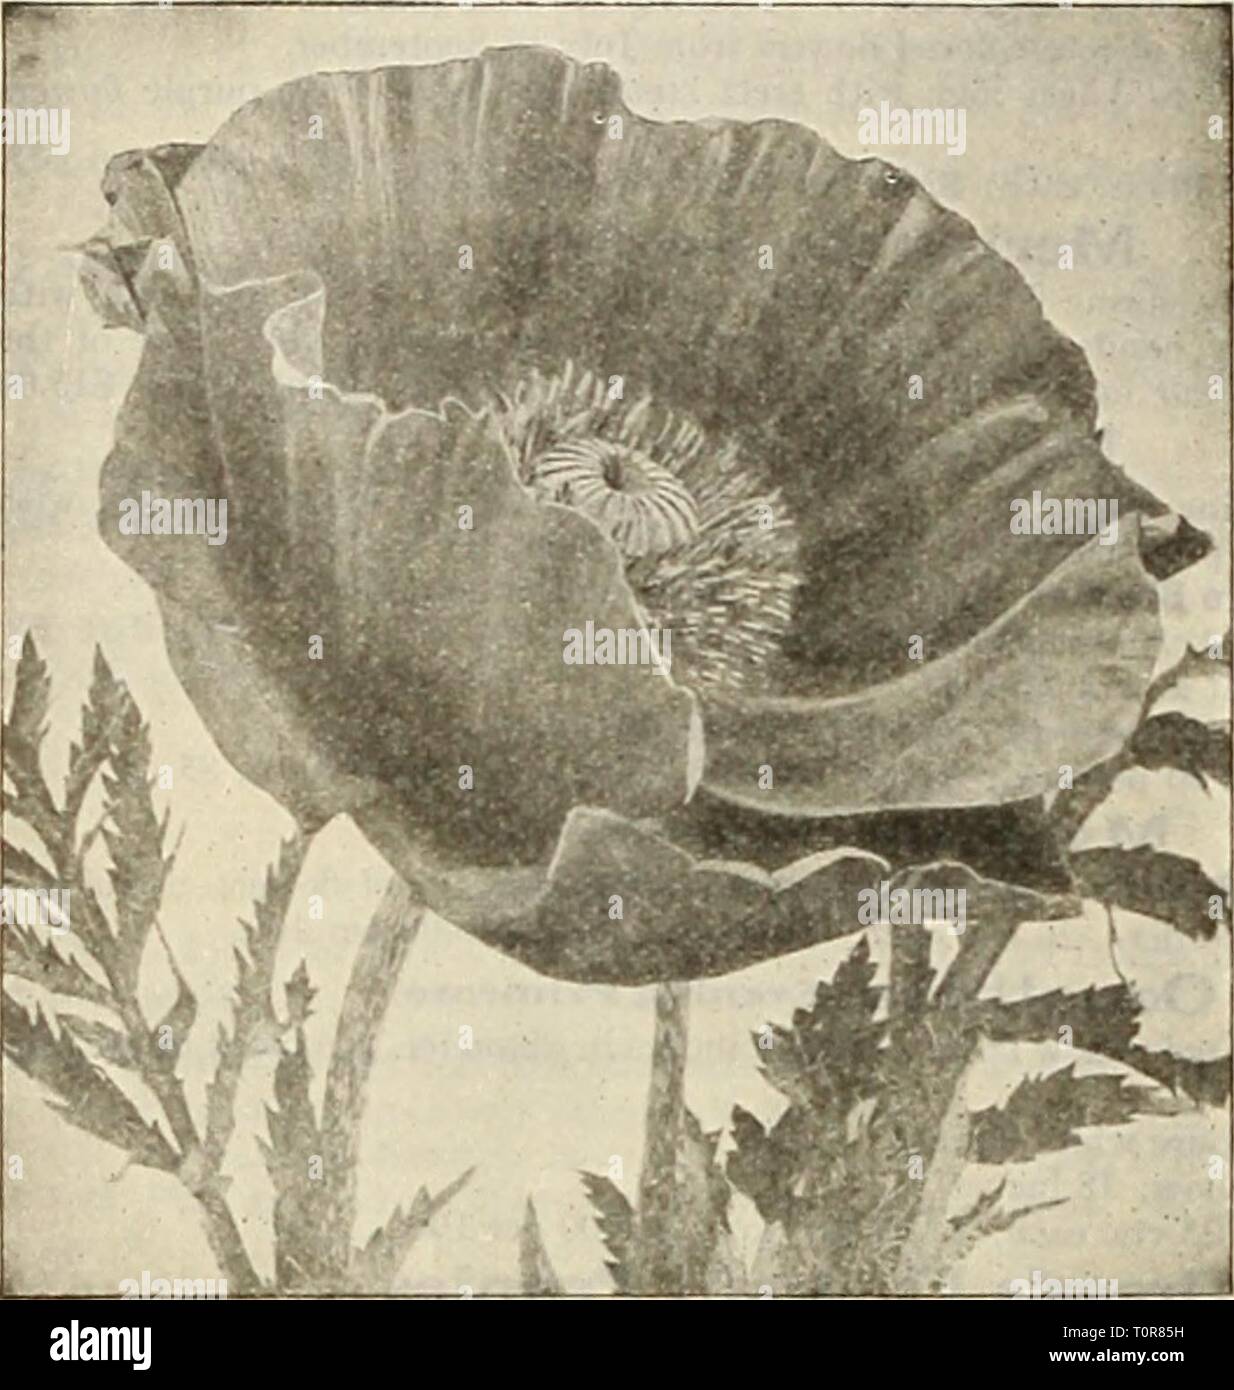 Dreer's autumn catalogue 1925 (1925) Dreer's autumn catalogue 1925  dreersautumncata1925henr Year: 1925  46 /flEHRyADREEfc^ HARDY PERENNIAL PIANTS &gt;HlLSBEIiPM    Oriental Poppy Papaver Orientale (Oriental Poppies) Autumn is the best time to plant the Oricnt:il Poppies, plantec at this time they are sure to flower the following summer. Choicest Mixed Hybrids. 20 cts. each; $2.00 per doz.; $15.00 per 100. PentStemOn (Beard Tongue) Most useful perennials, either for the border or rockery. Barbatus Coral Gem. Dense showy spikes of coral pink flowers, June 2i feet. Barbatus Torryeii. Spikes of b Stock Photo